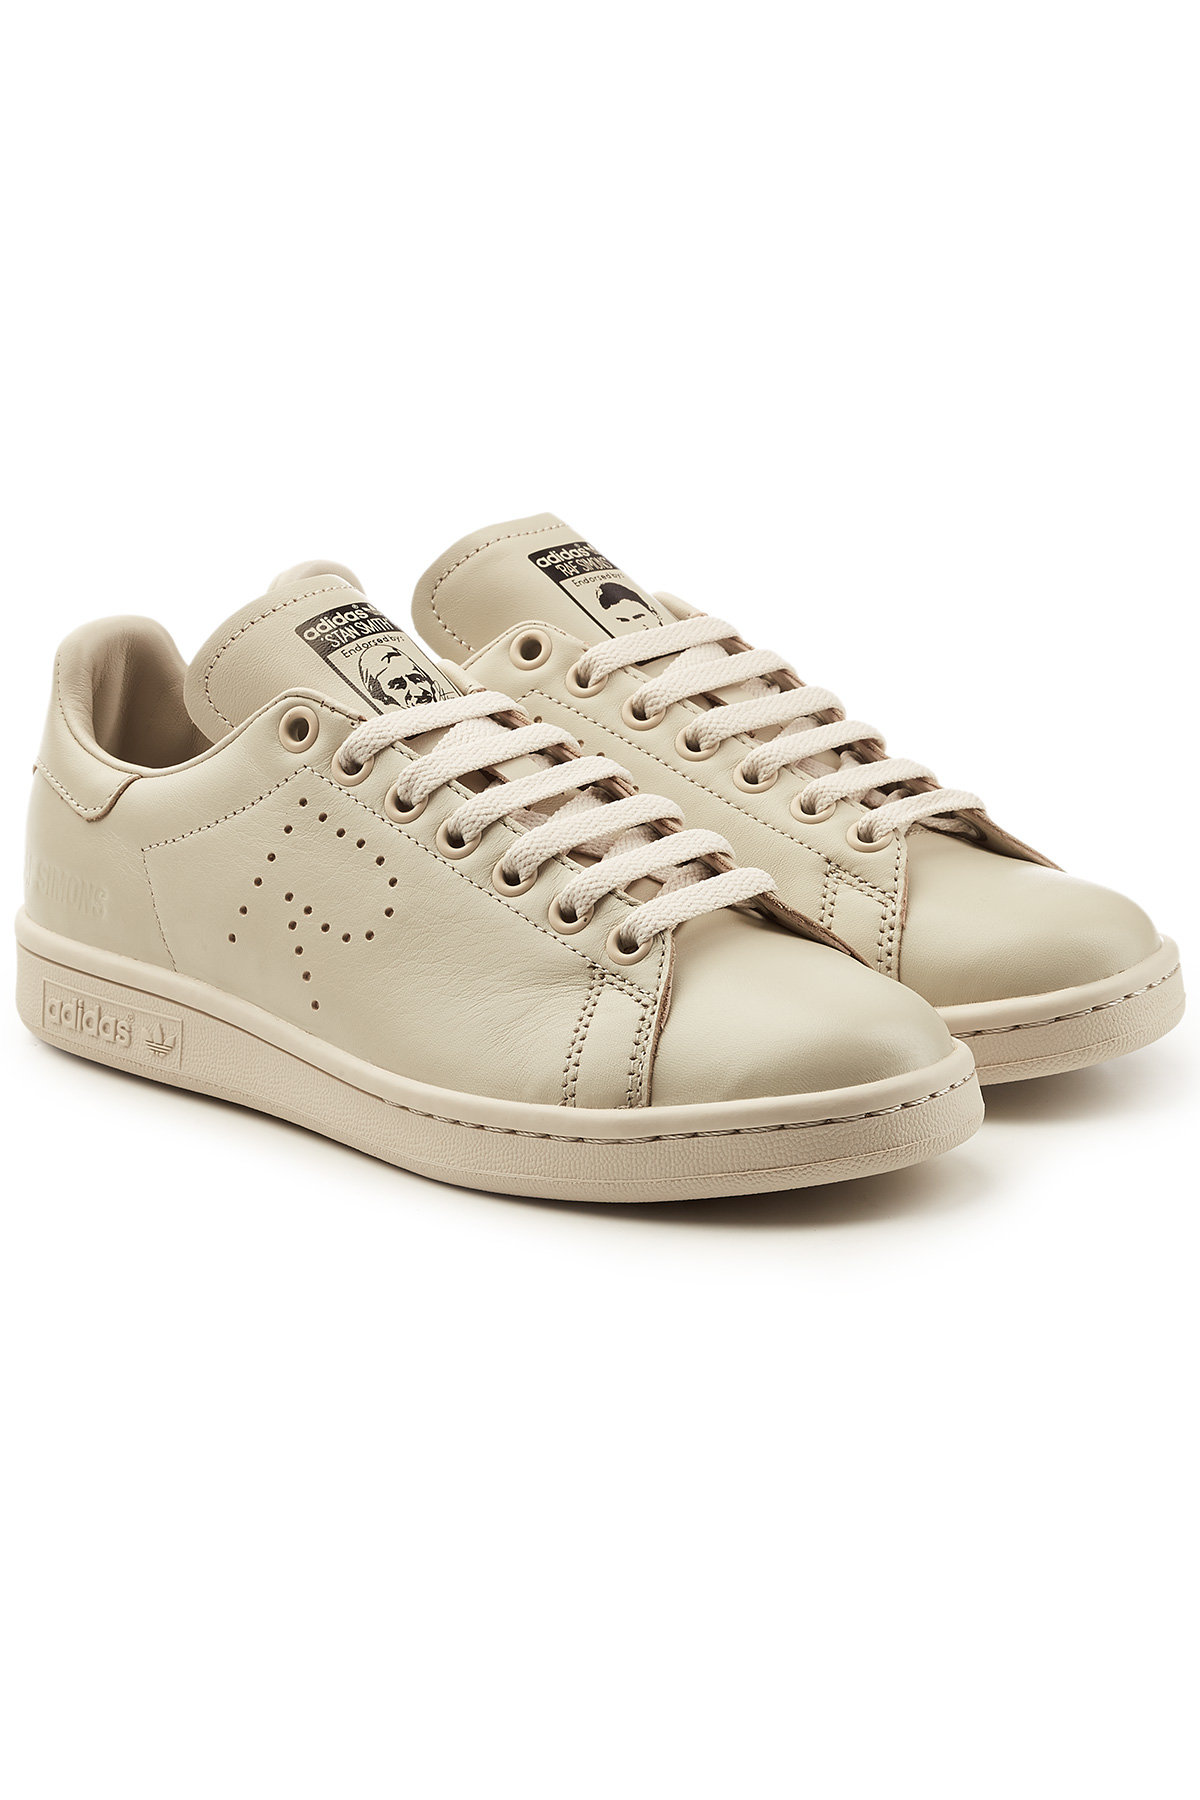 Adidas by Raf Simons - RS Stan Smith Leather Sneakers